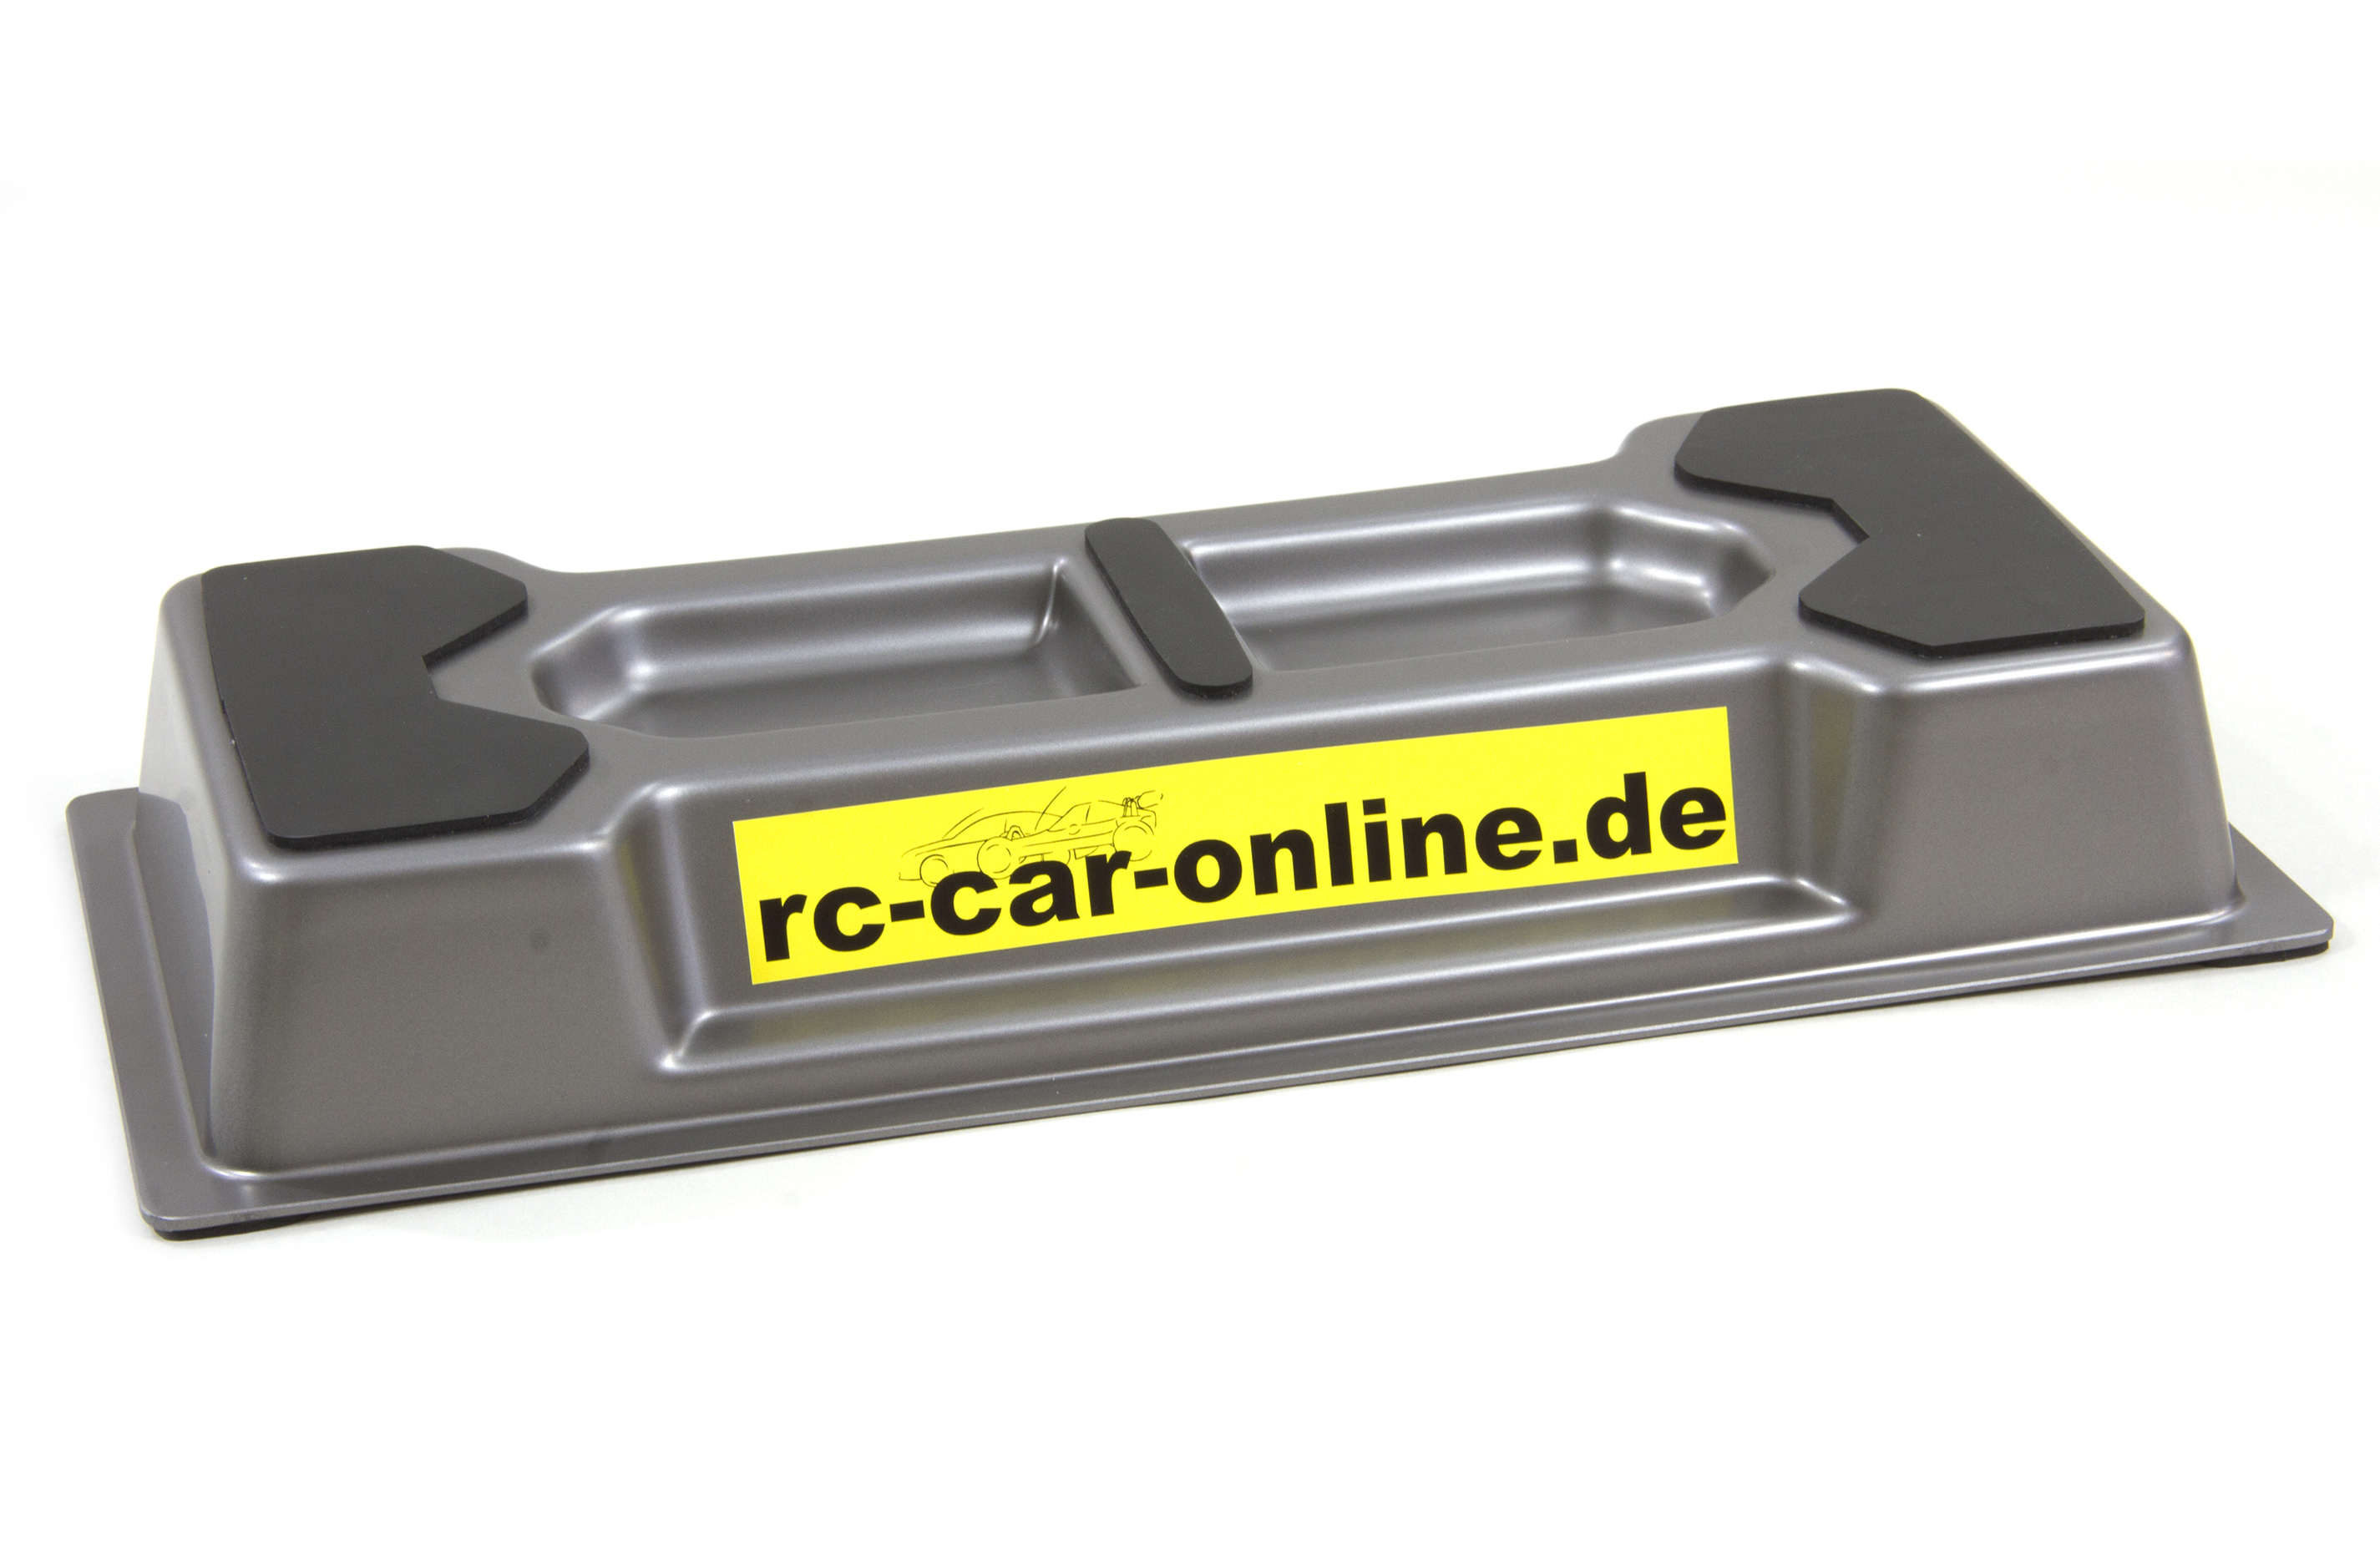 y1104 Maintenance tray for 1/5 cars